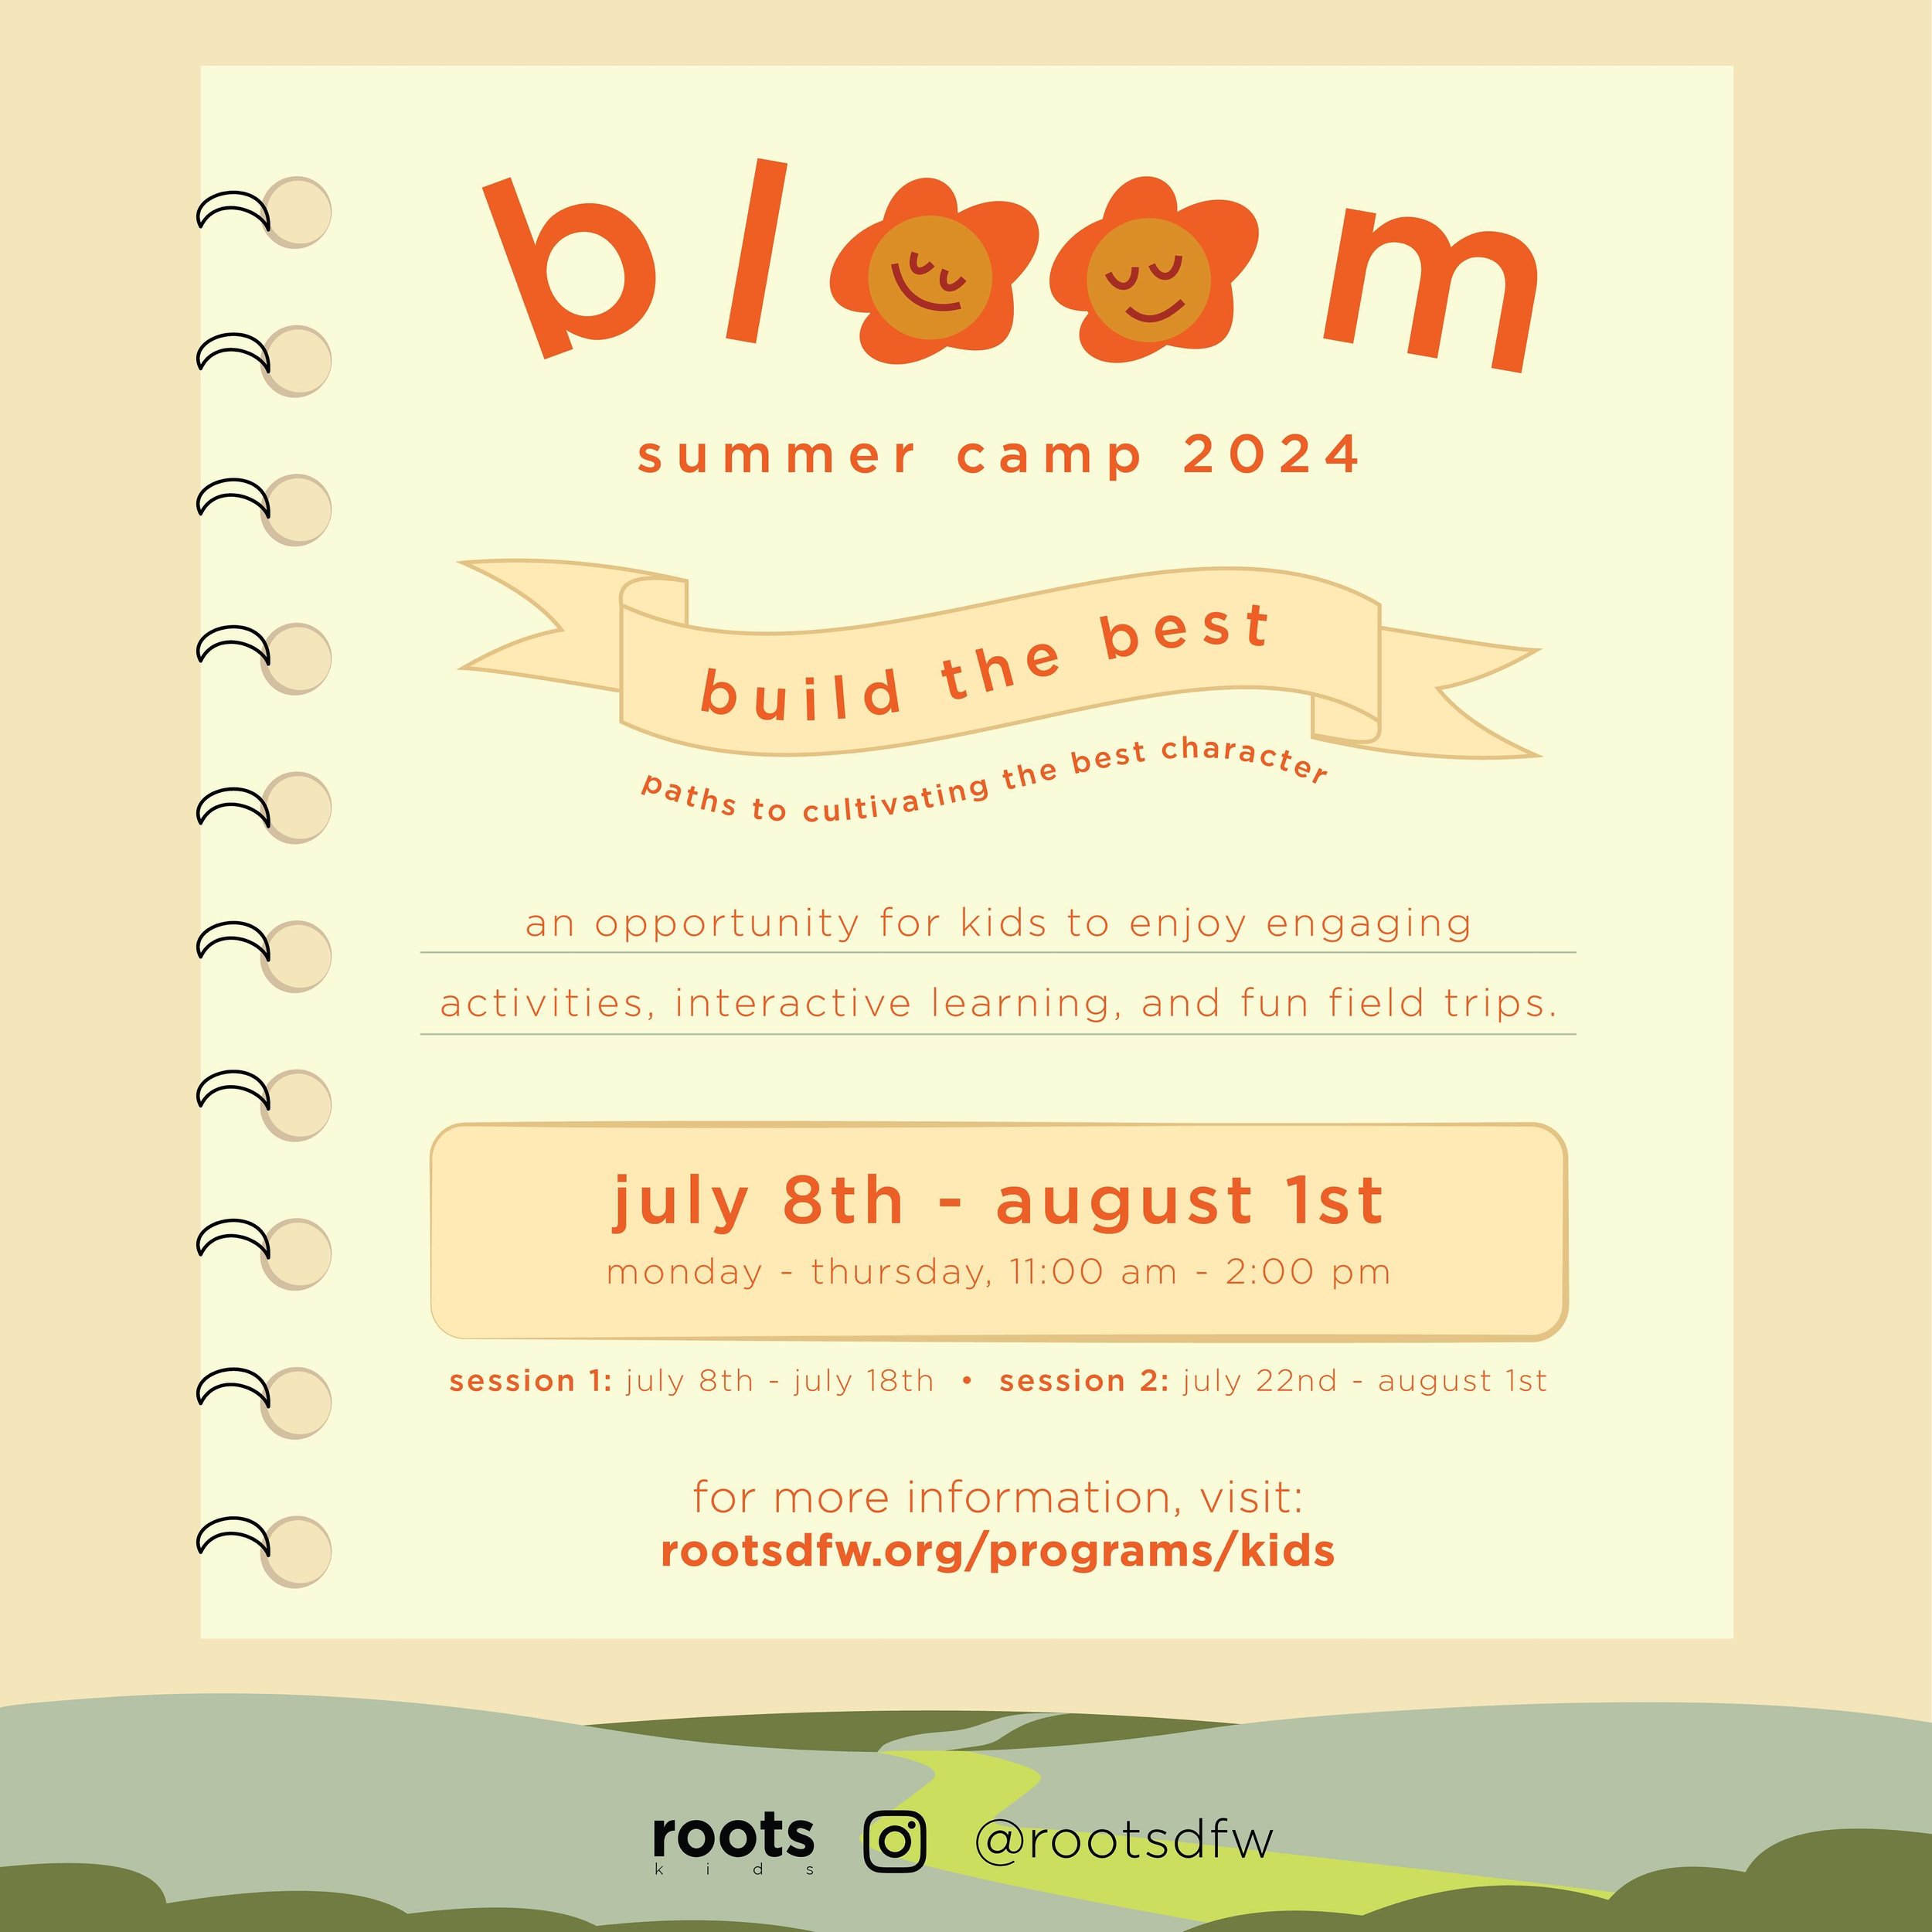 Summer is here! We are excited to announce the launch of our 2024 Bloom Summer Camp&mdash; an opportunity for kids to enjoy each others&rsquo; company while participating in various summer activities, facilitated with the goal of helping our children